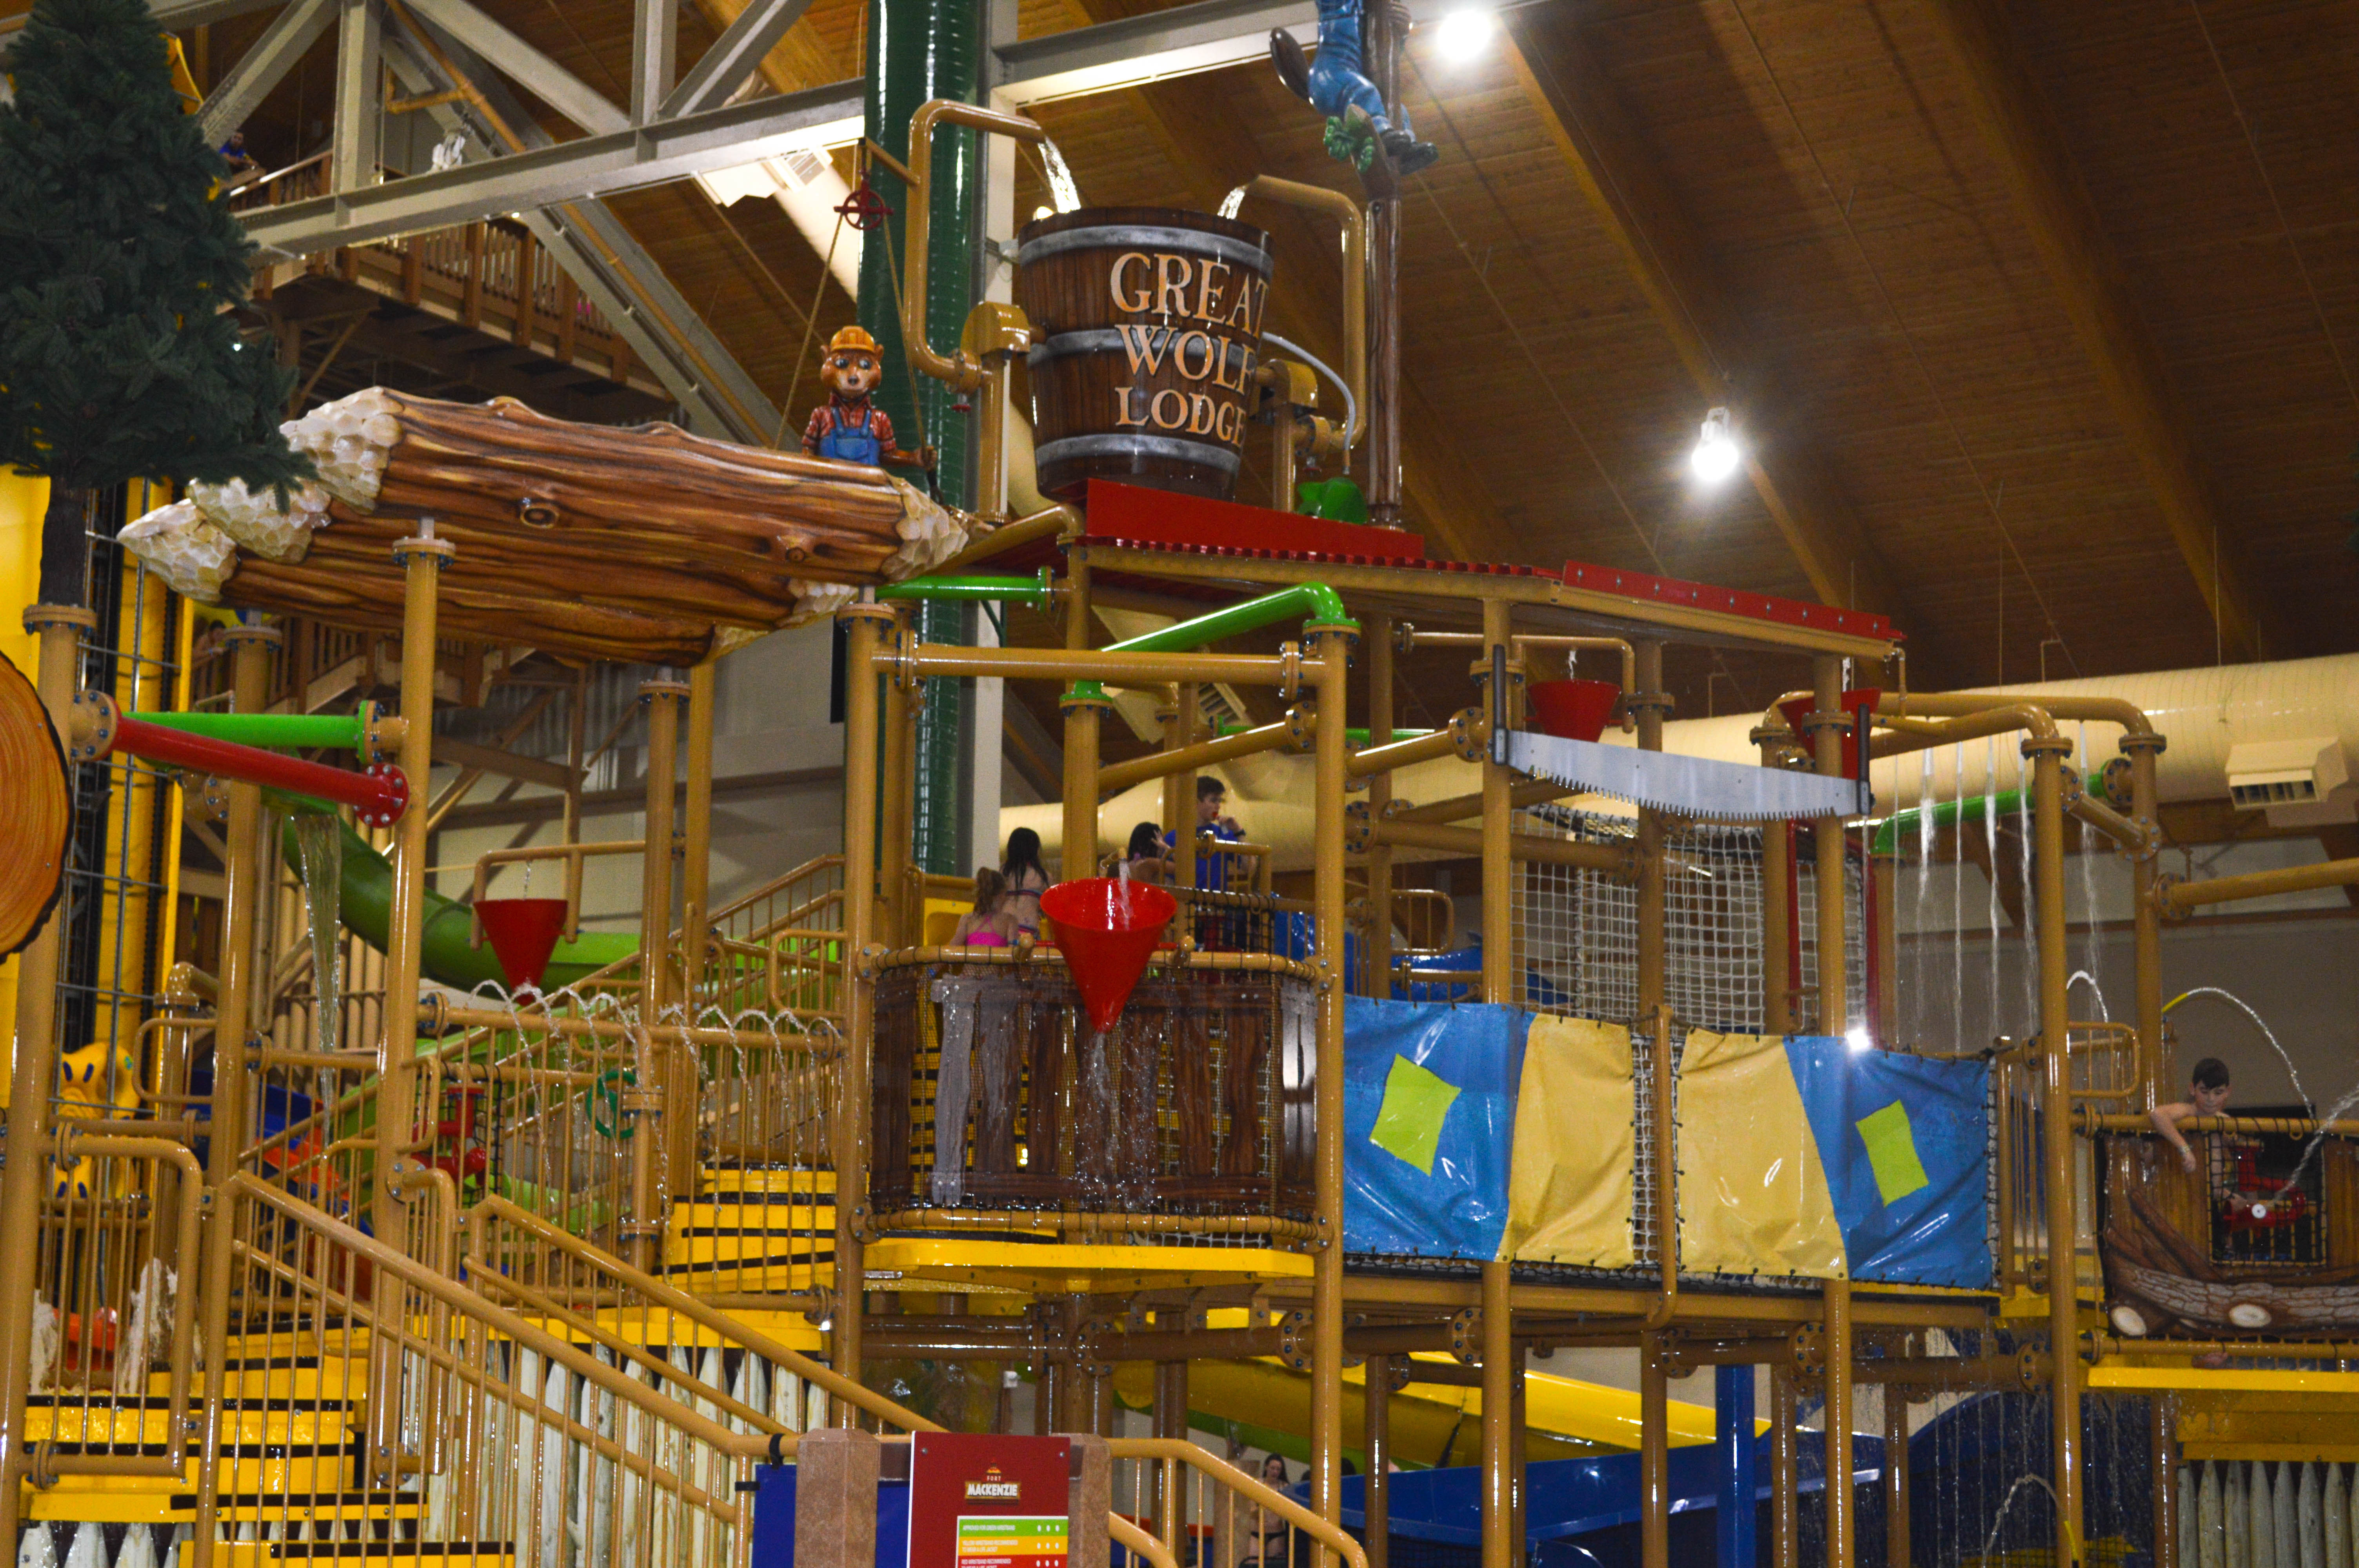 Newest Great Wolf Lodge Location in Colorado Springs, featured by popular life and style blogger, All Things Lovely